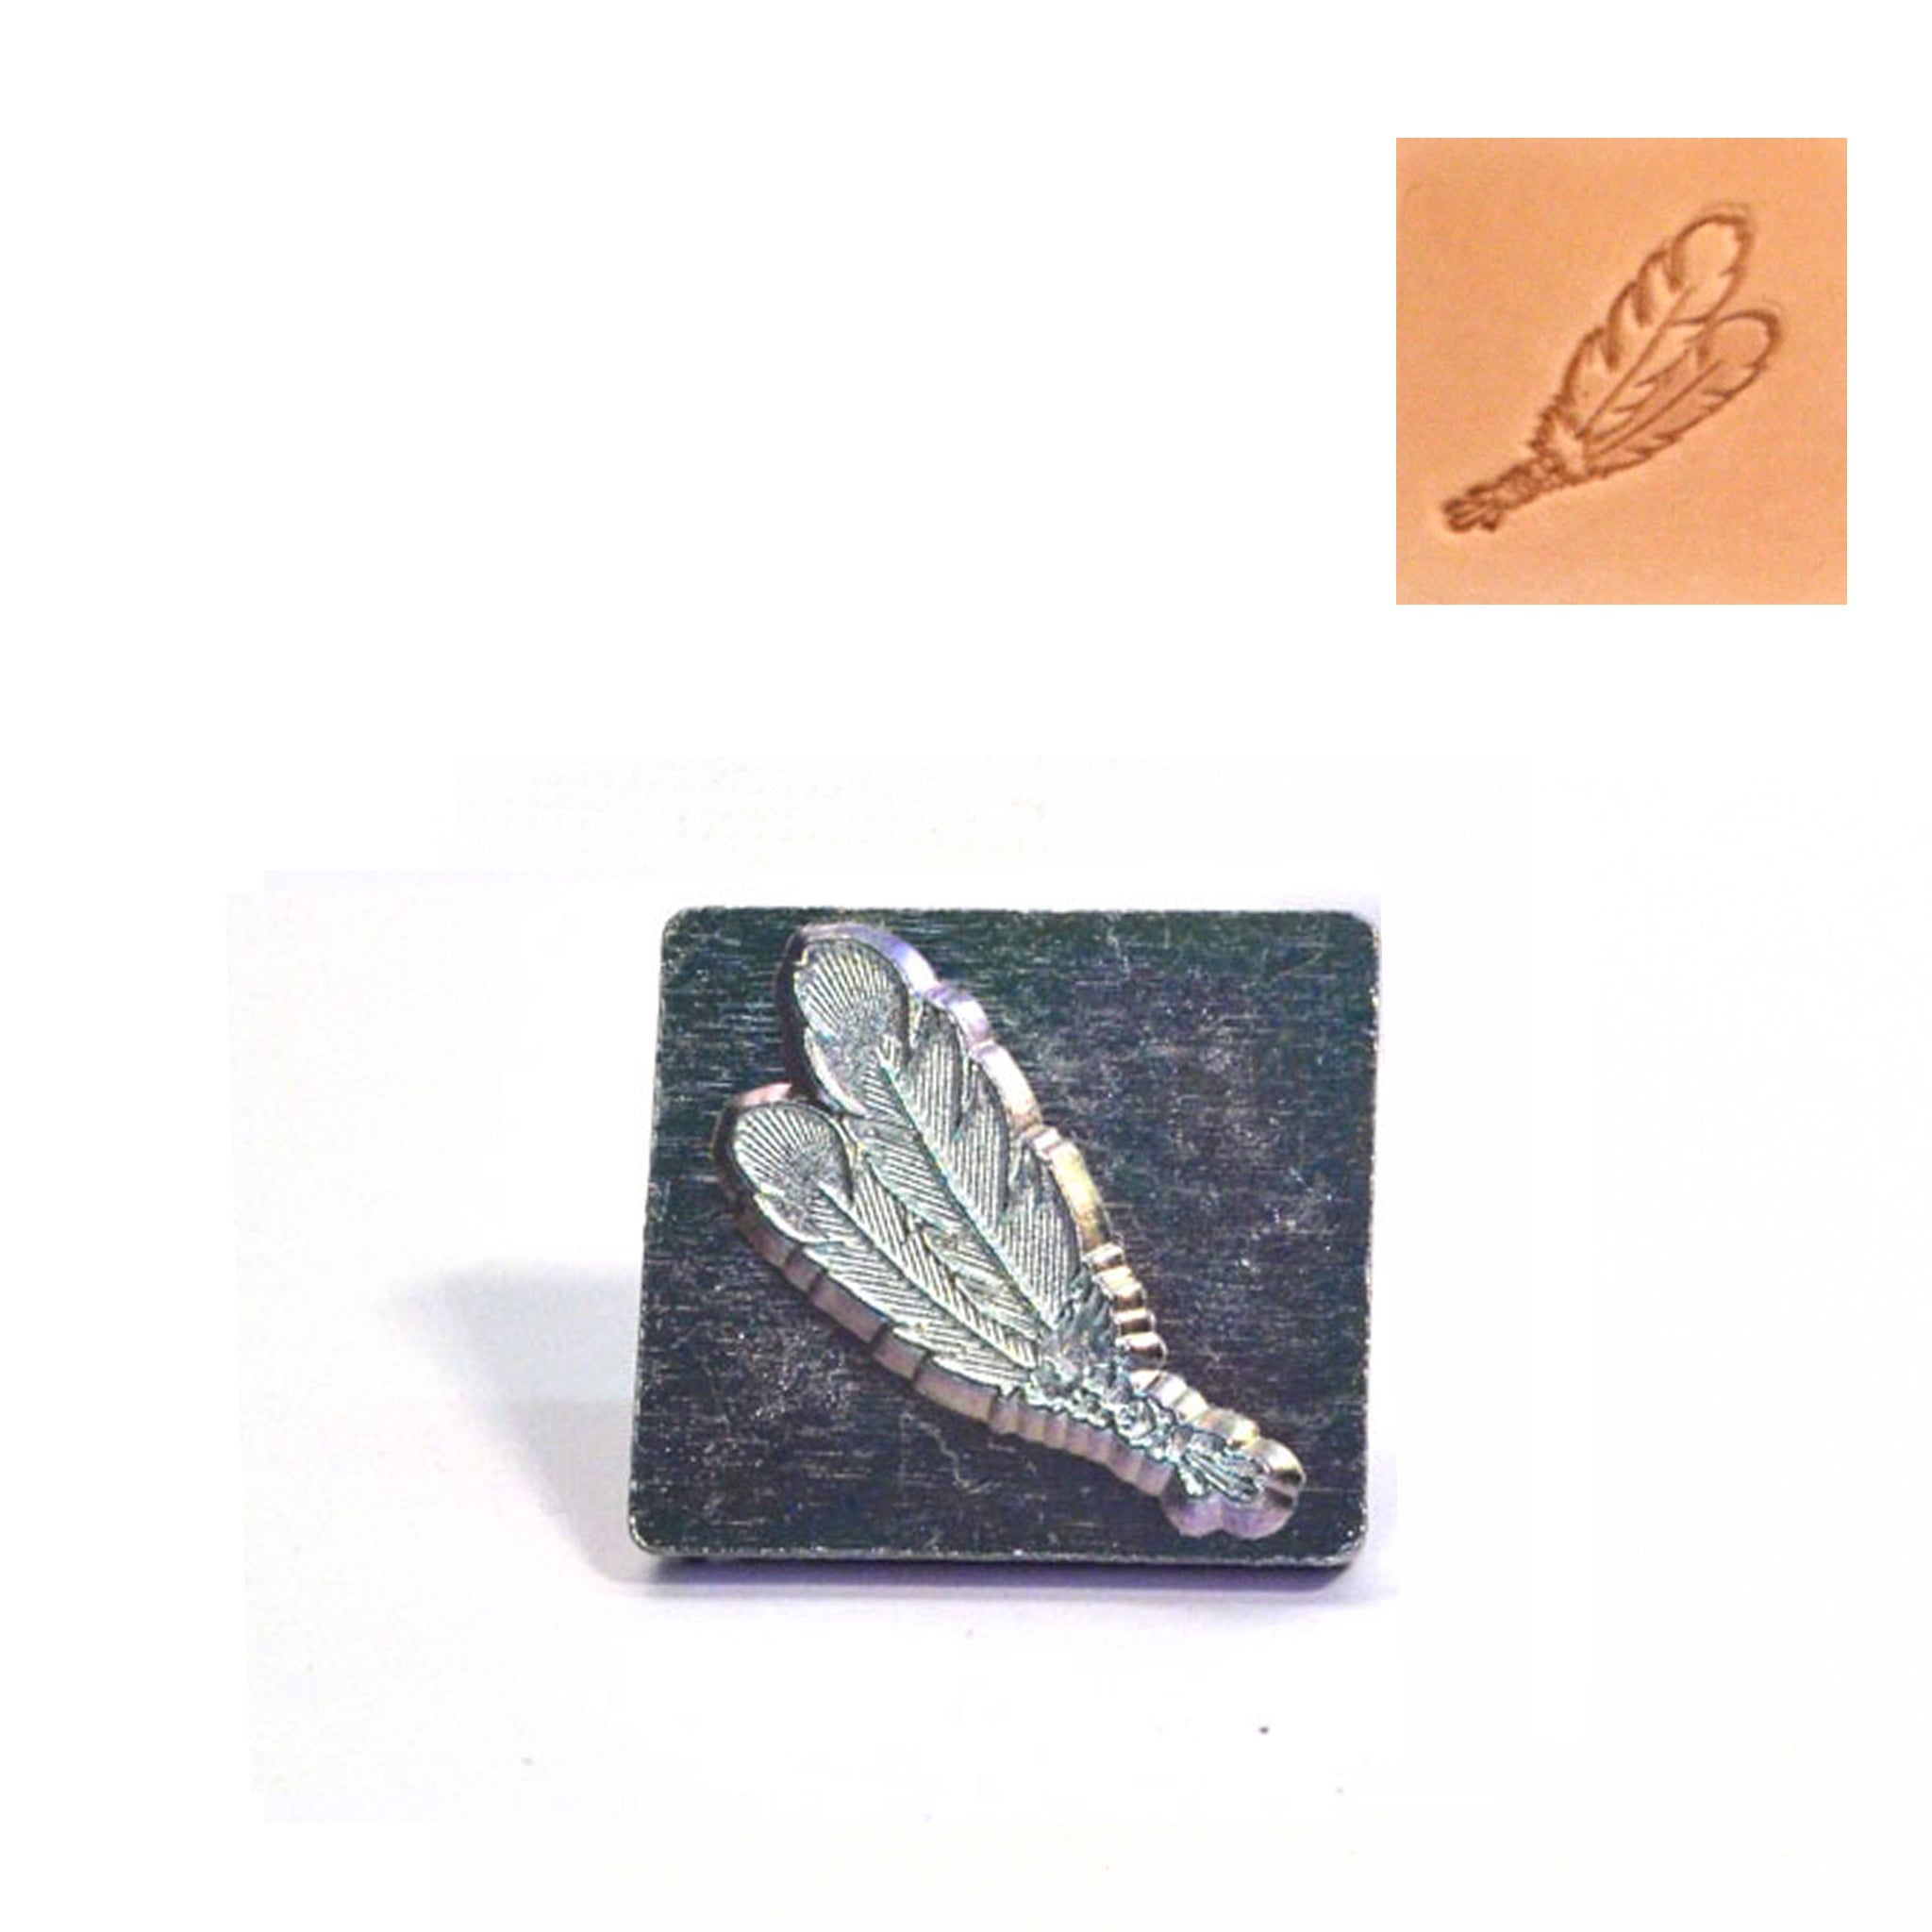 Two Feather 3D Embossing Stamp from Identity Leathercraft